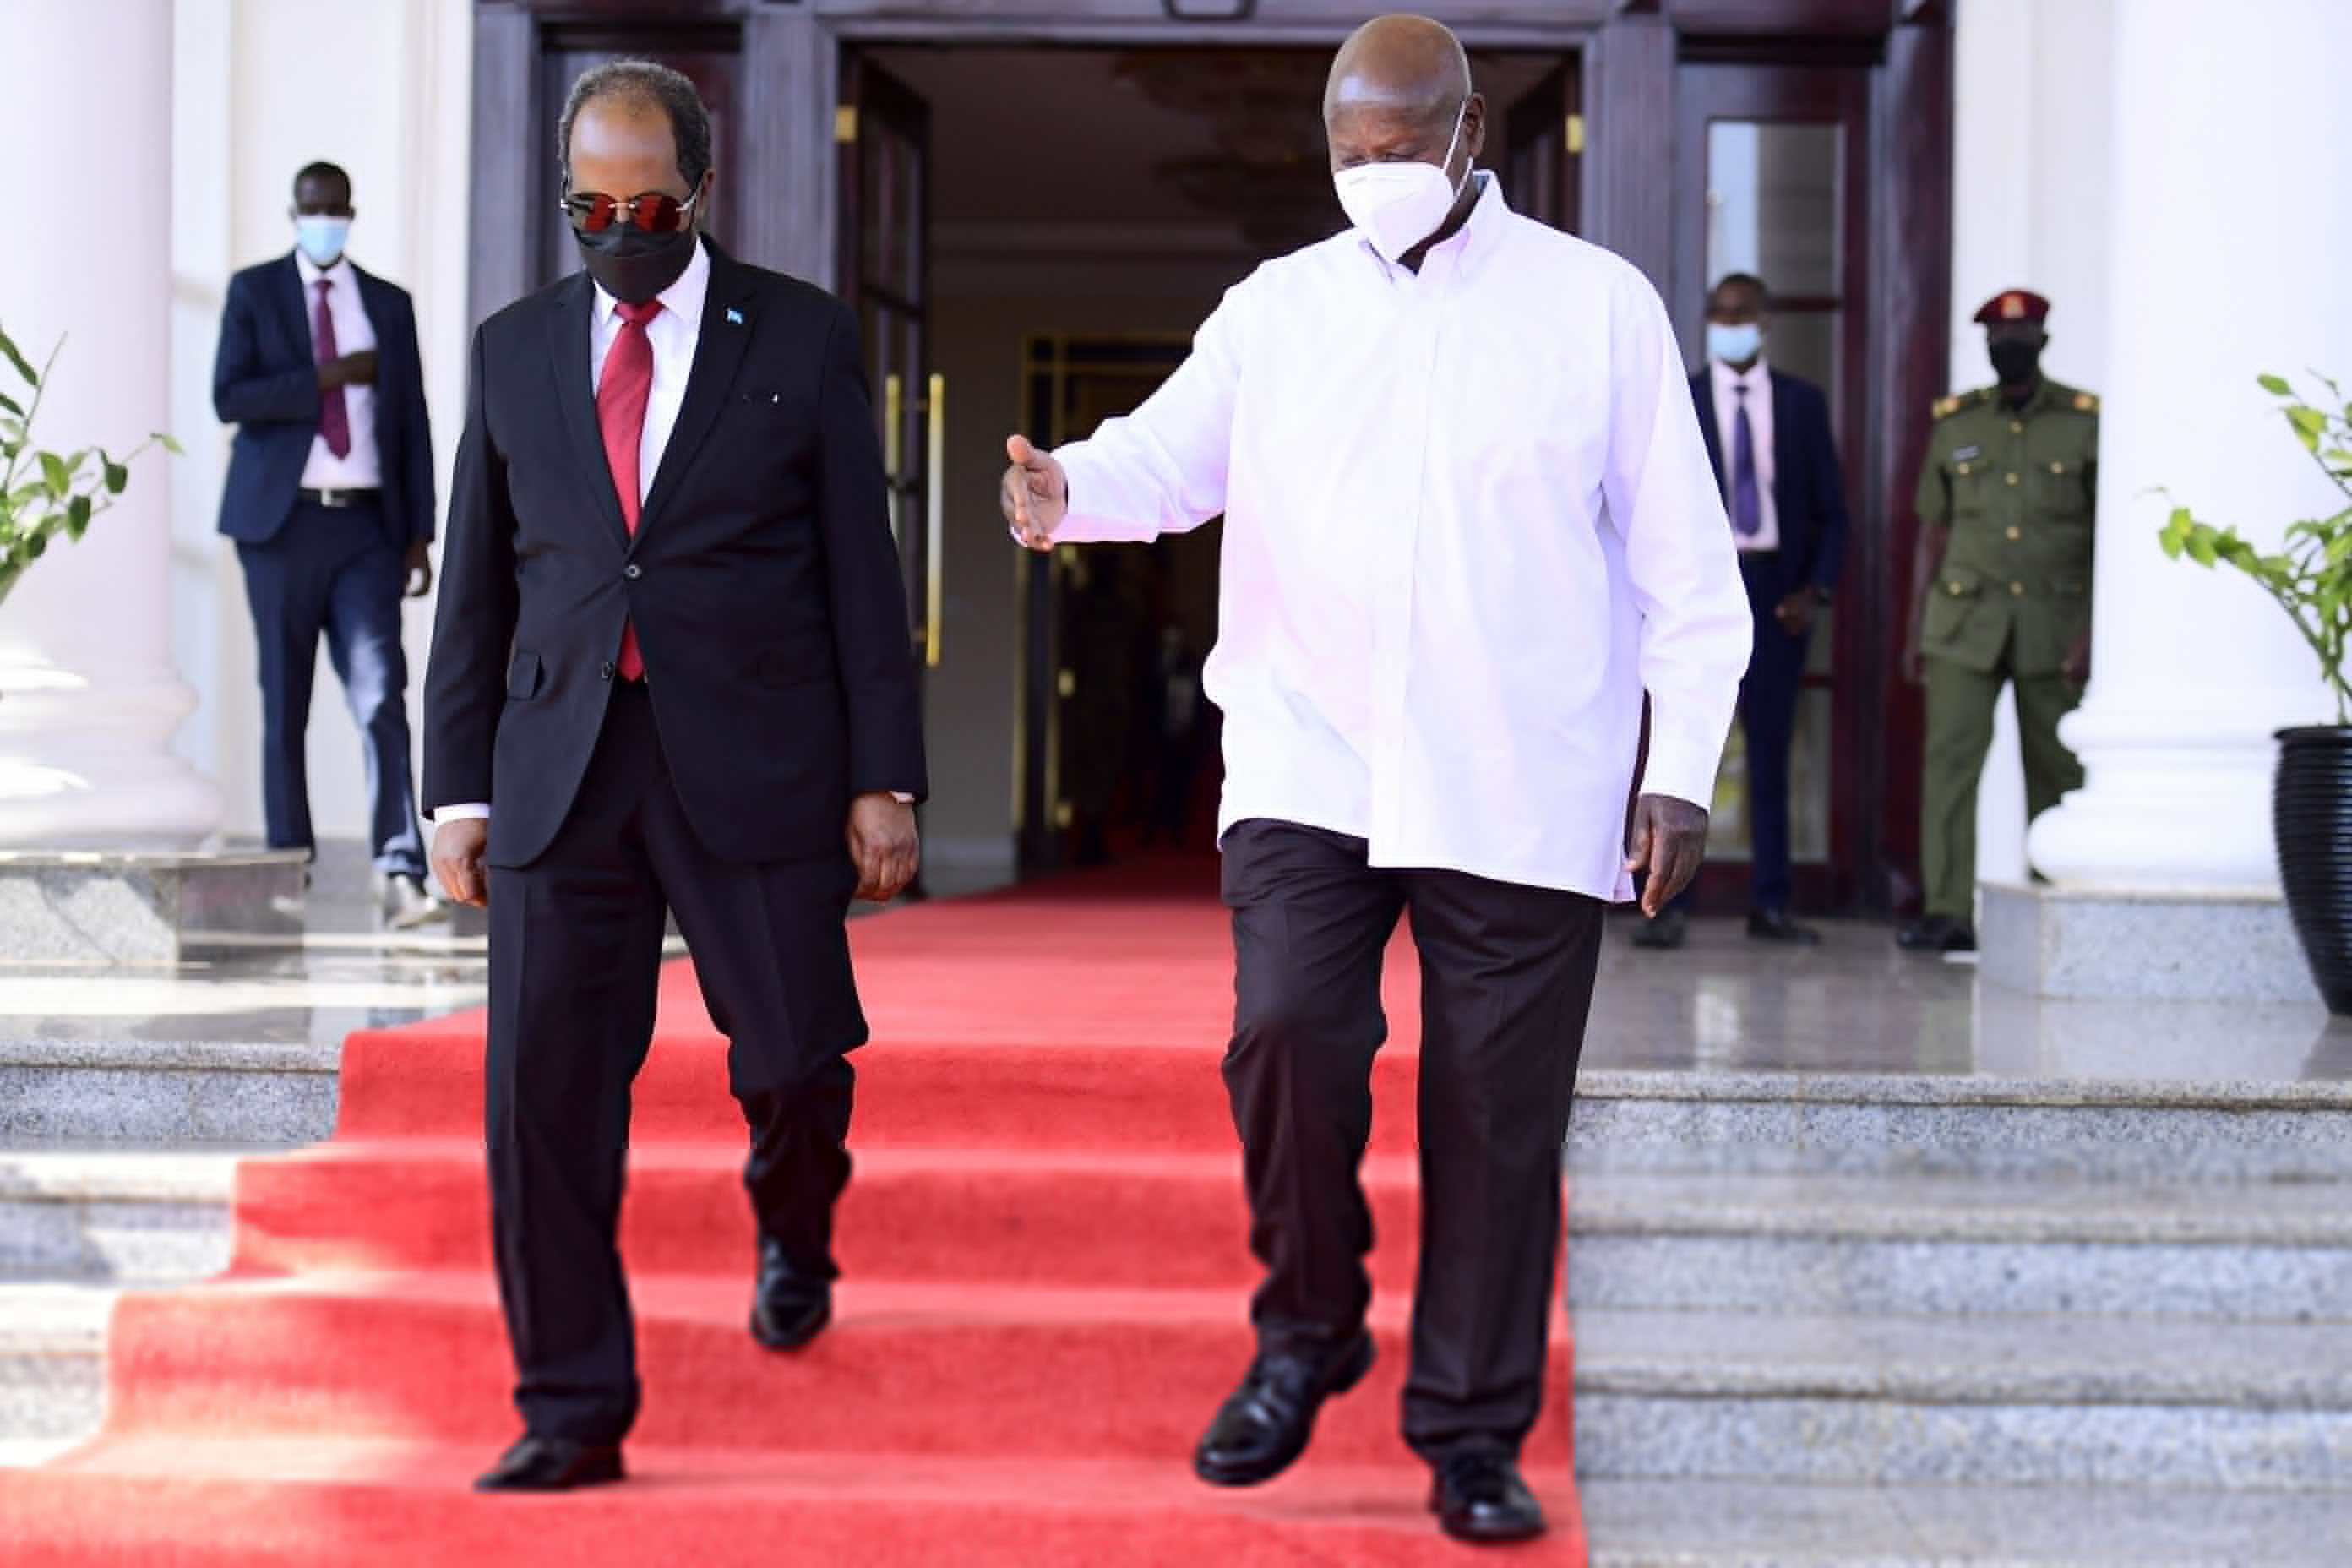 Museveni and Sheikh Mohamud last evening. The Somali President is in the country for a 3-day state visit